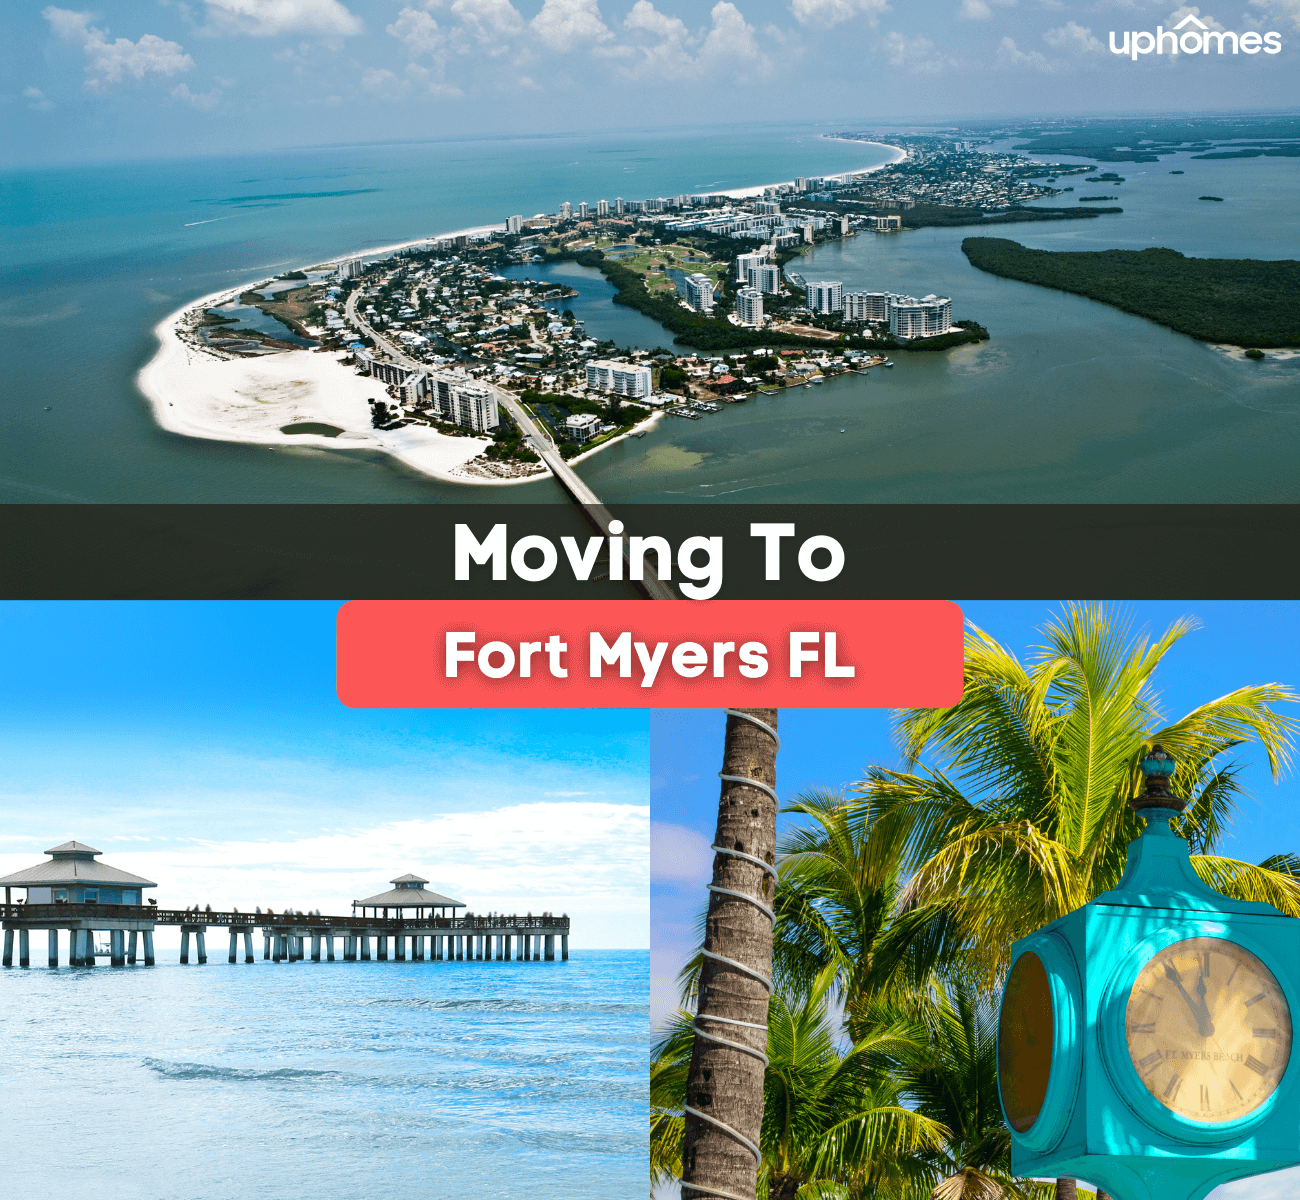 Moving to Fort Myers, FL - What is it like living in Fort Myers?